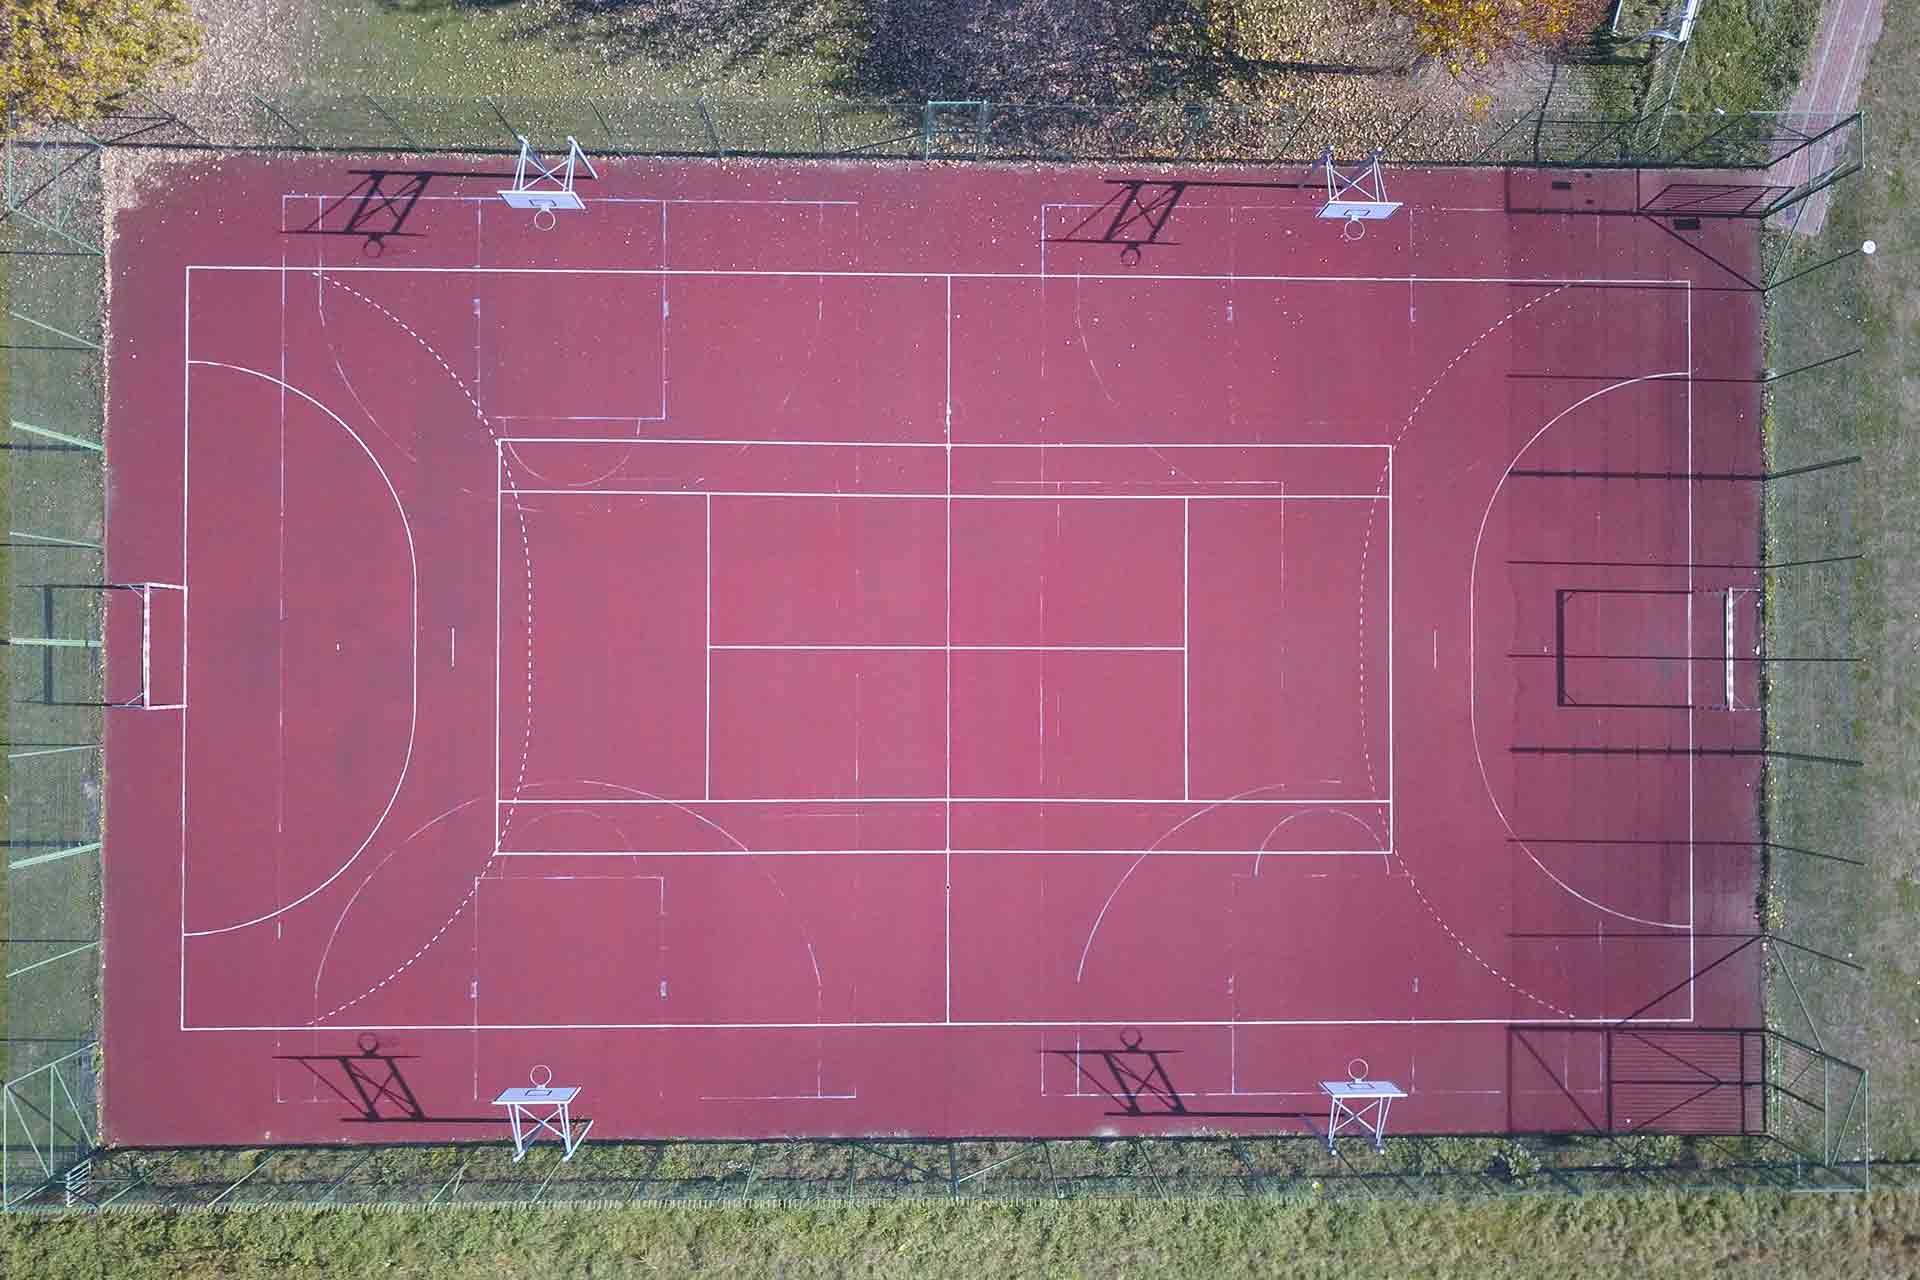 Information About the Construction of the Basketball Court 2023